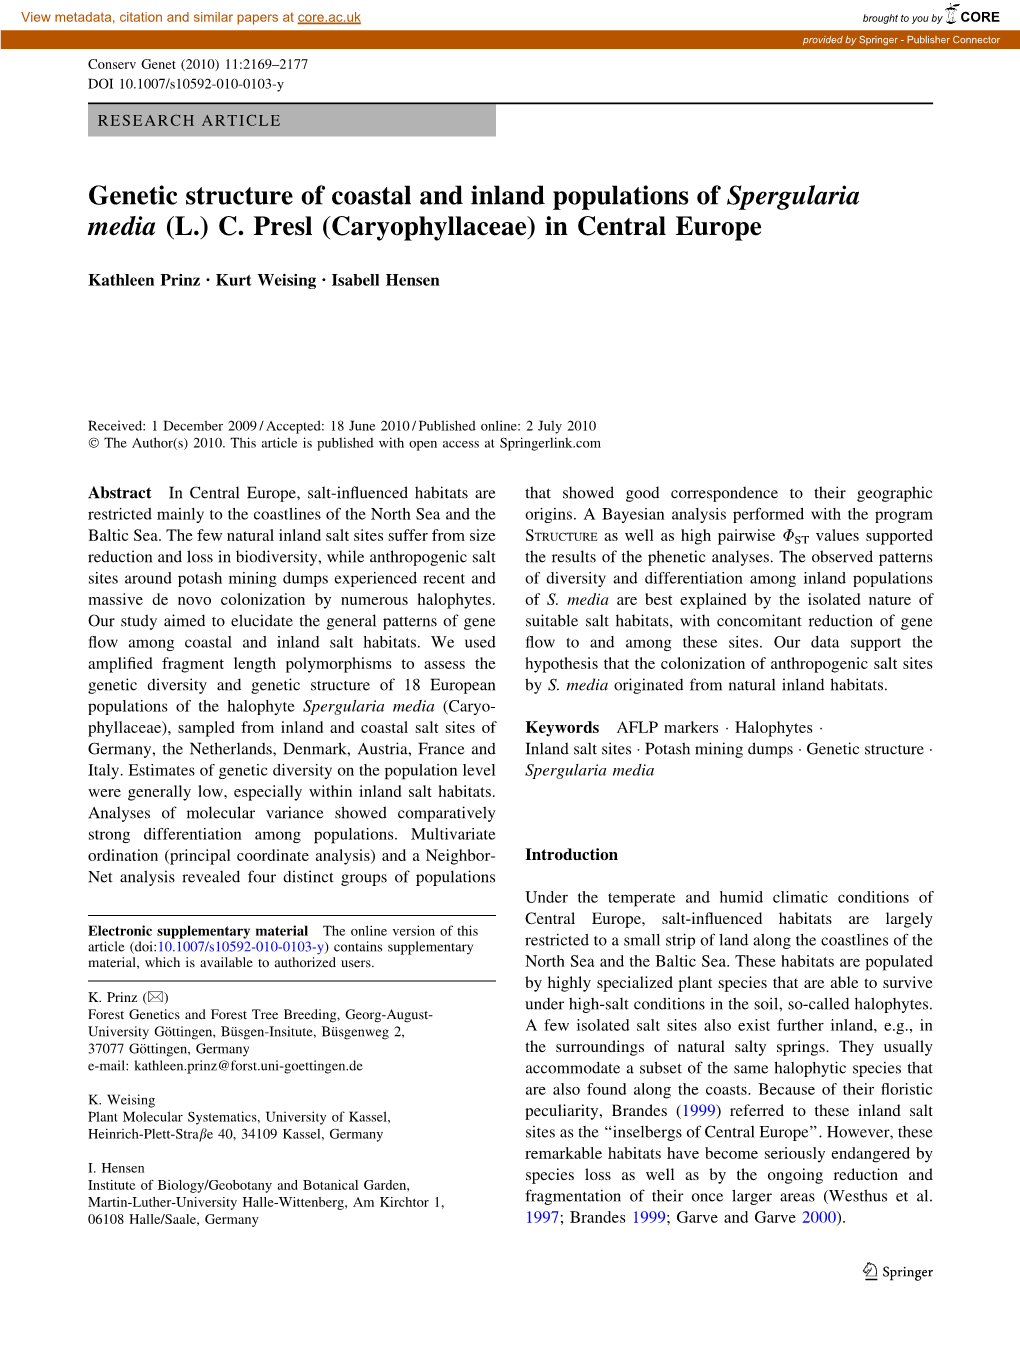 Genetic Structure of Coastal and Inland Populations of Spergularia Media (L.) C